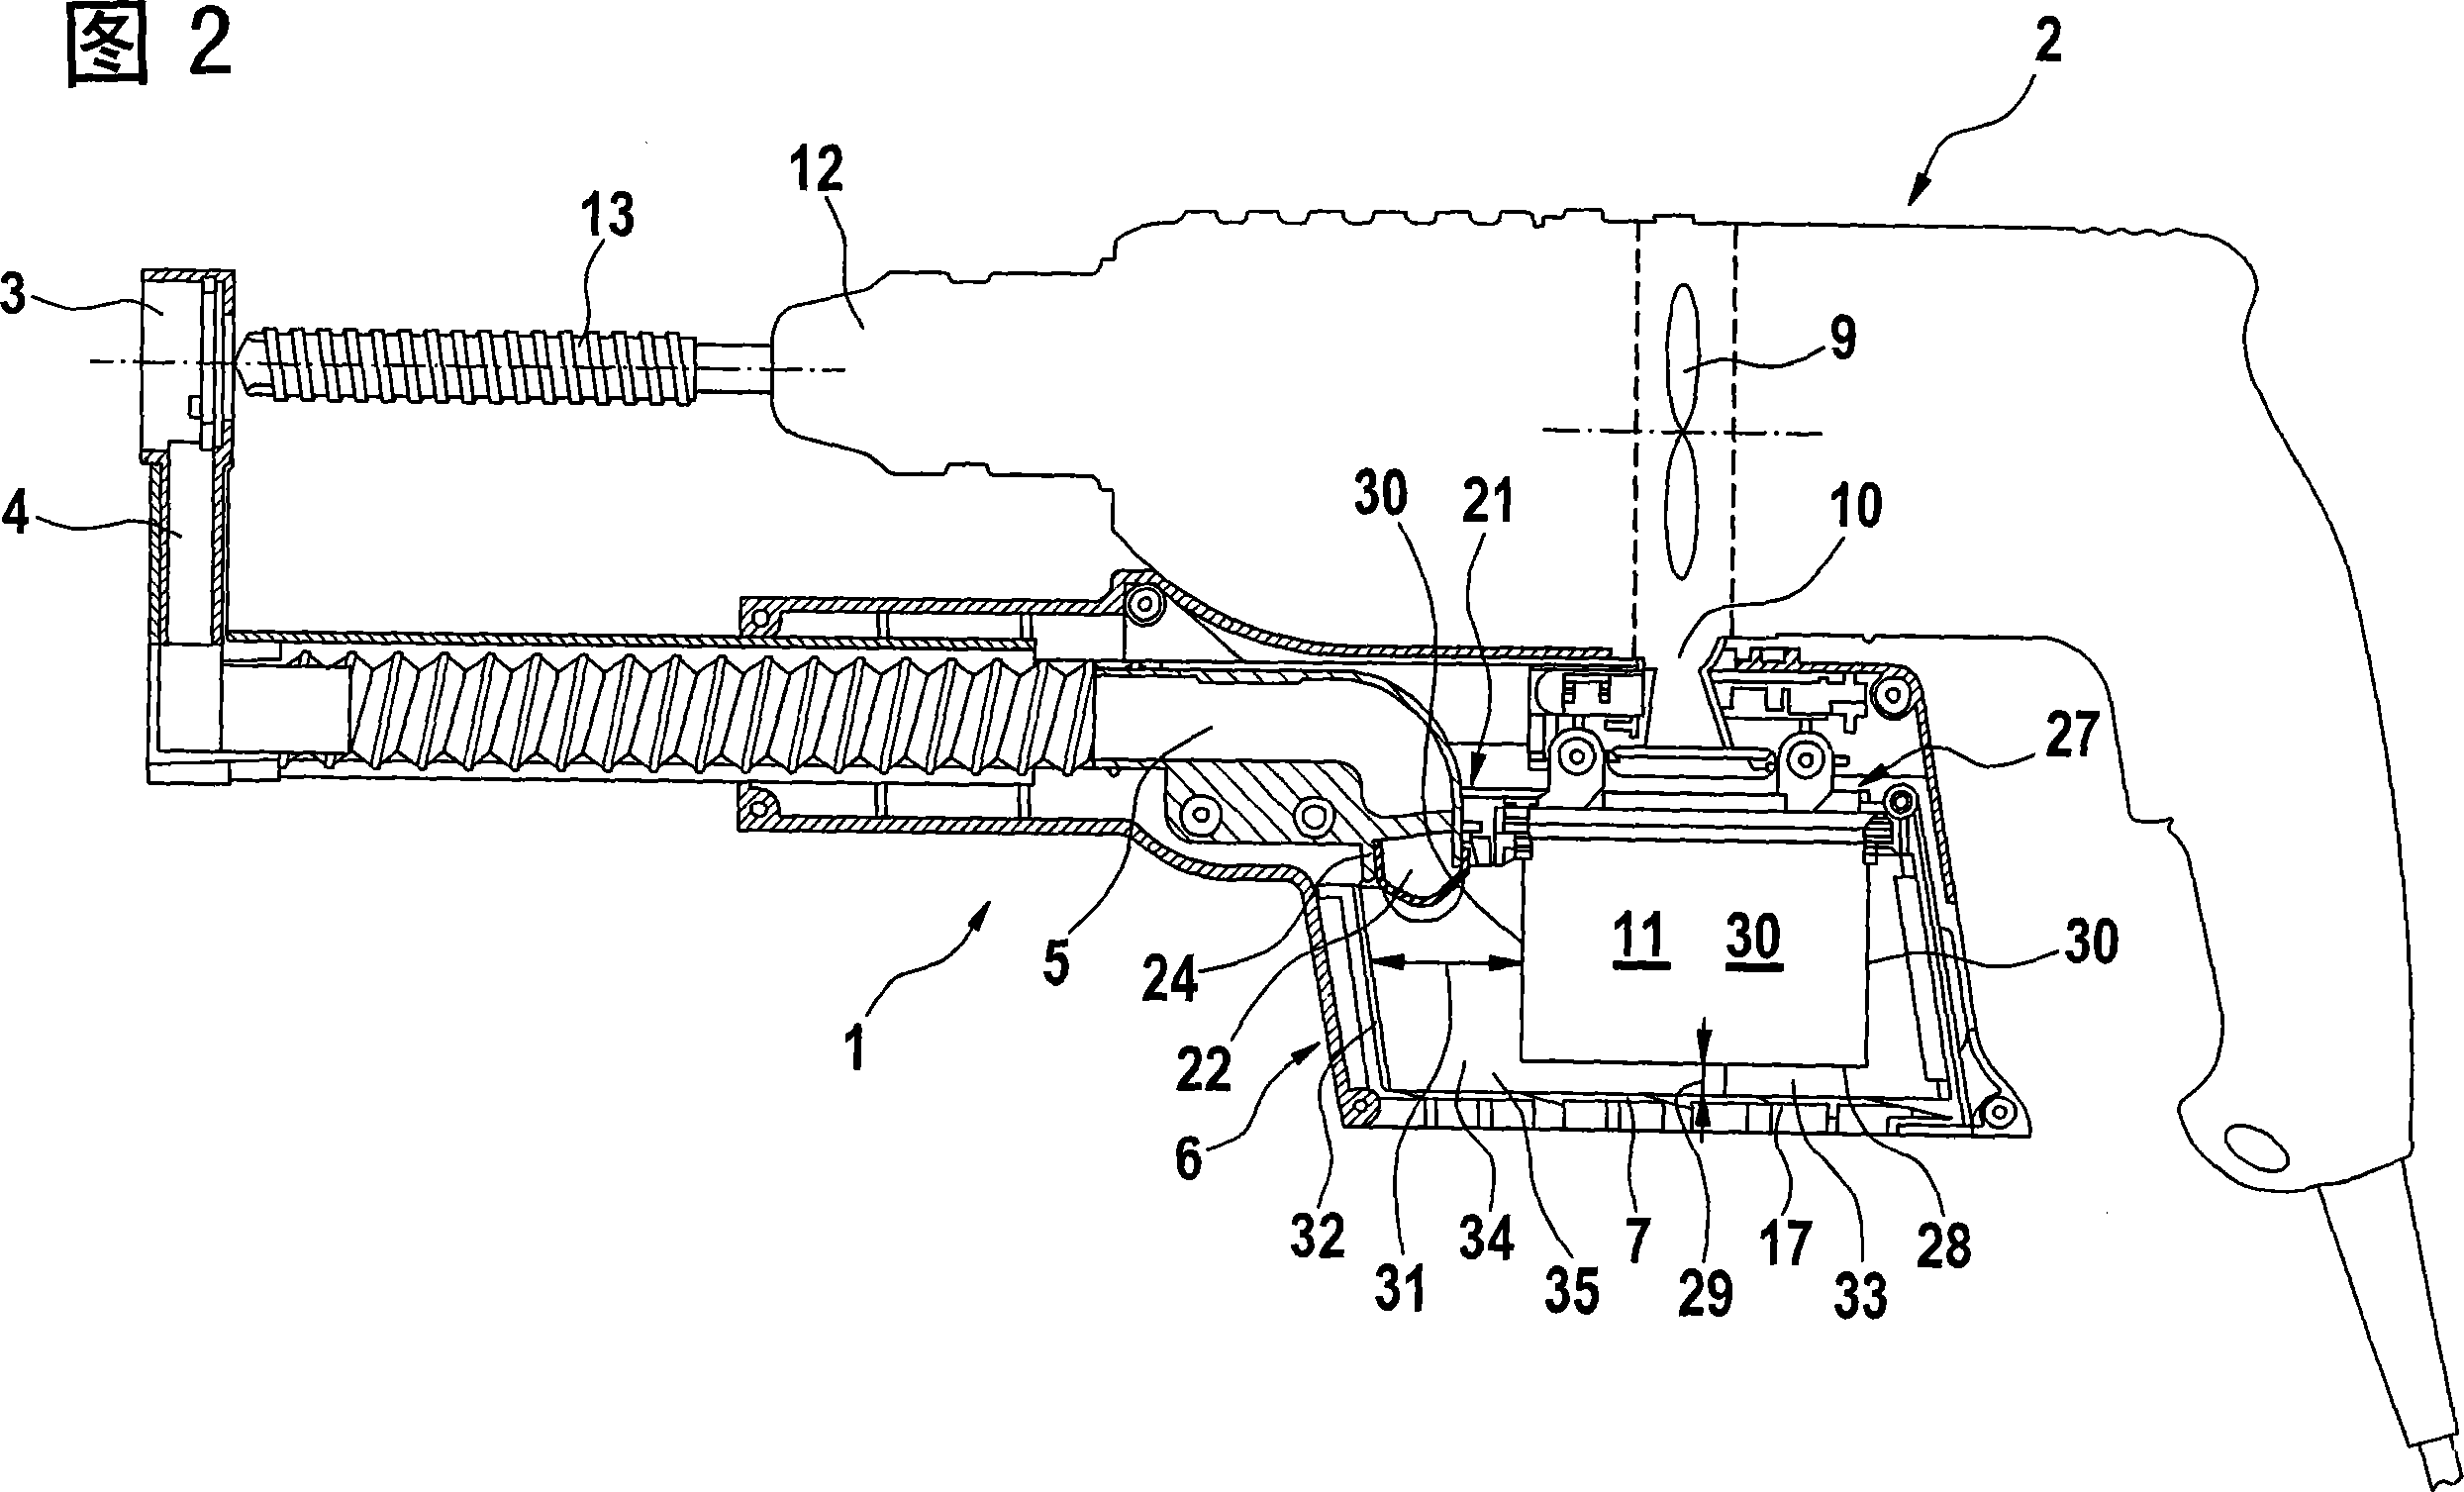 Dust collection device for an handheld electrical tool